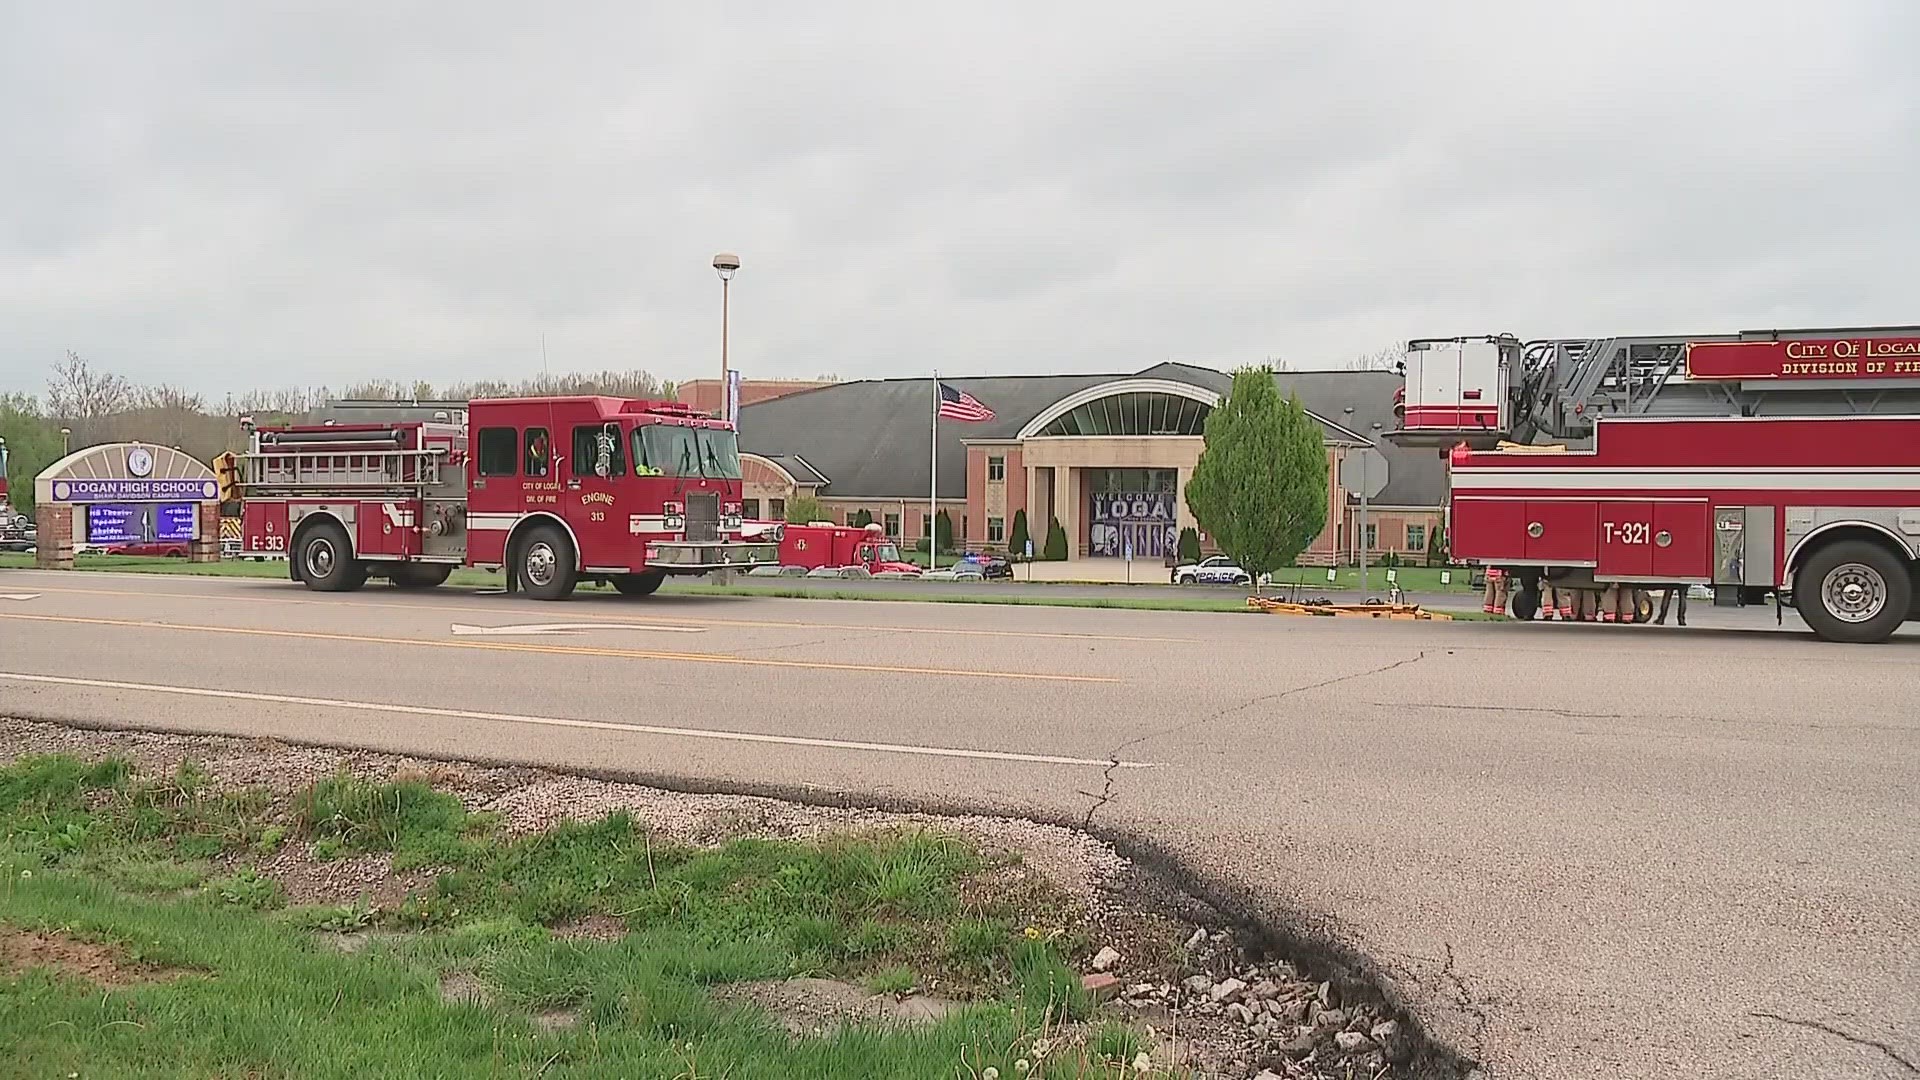 Students at the high school were protesting Wednesday morning to bring awareness to mental health when a fire alarm went off.